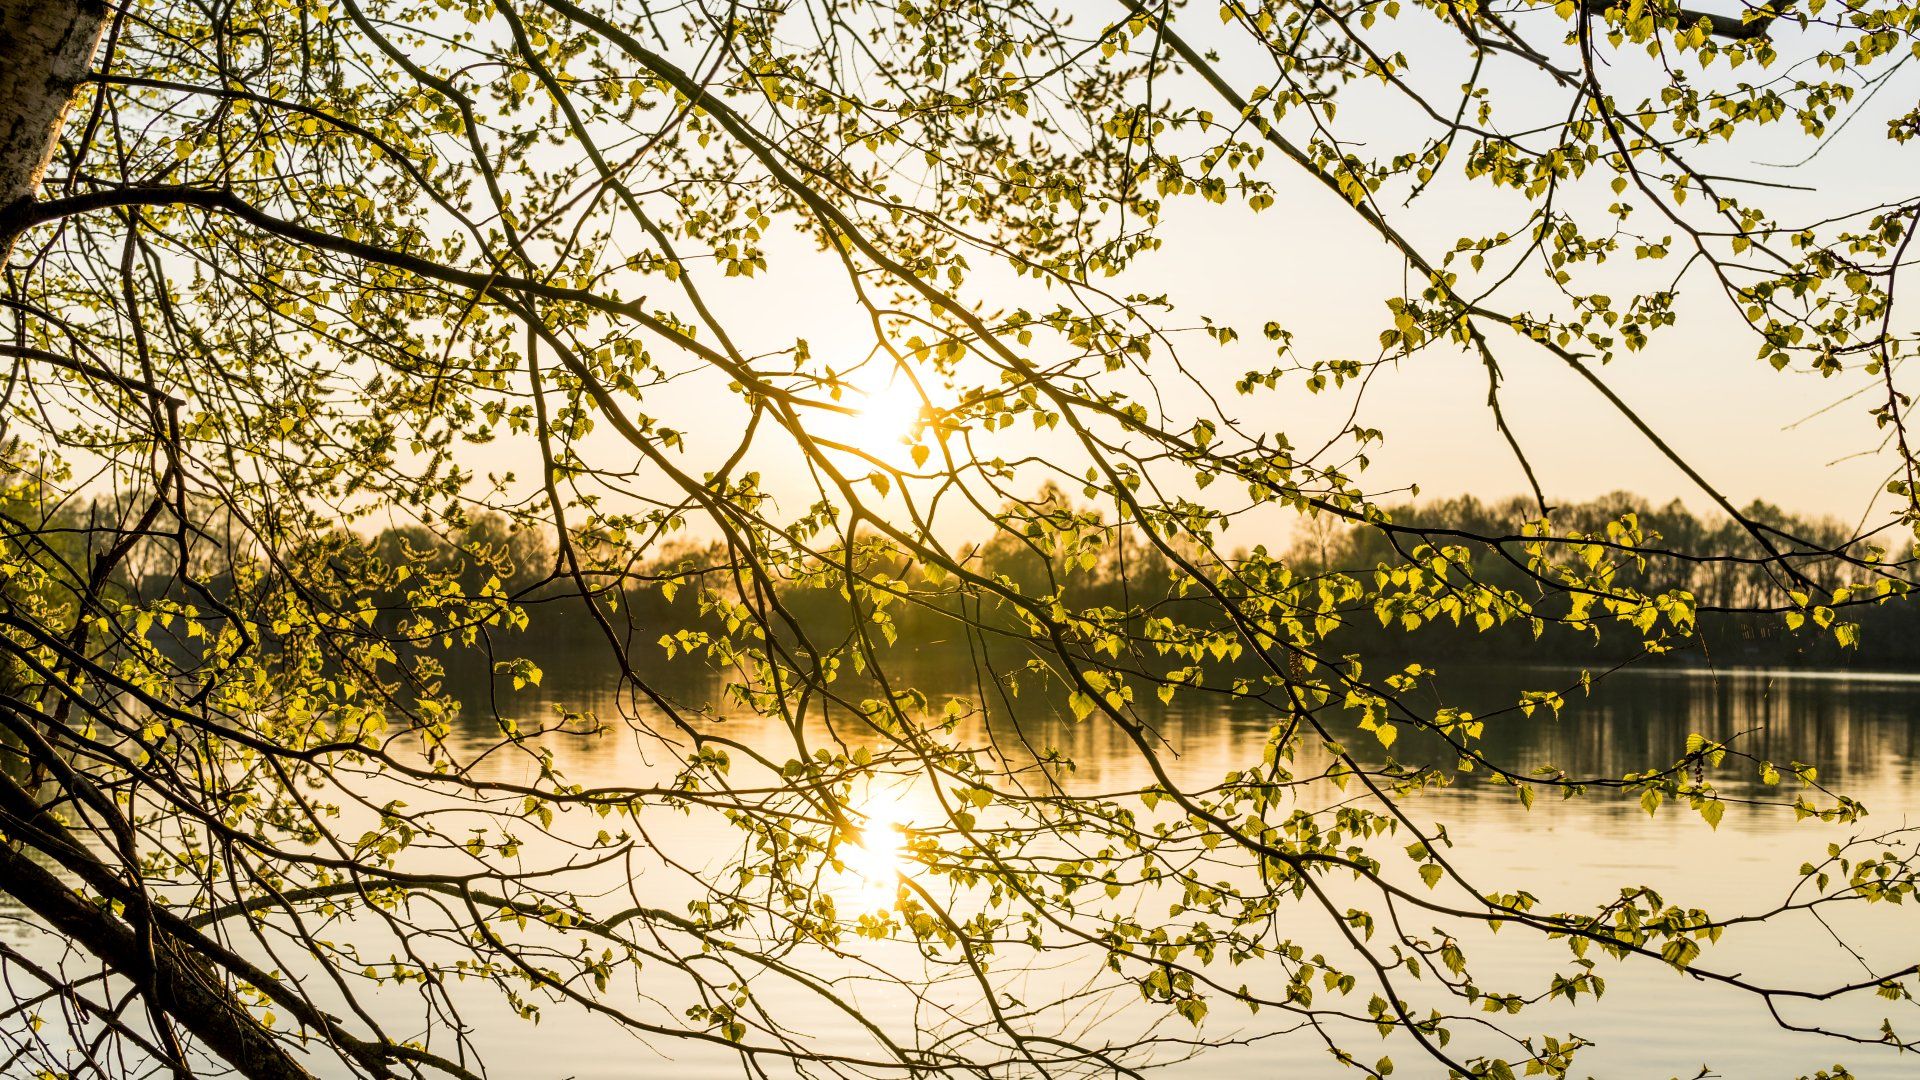 the sun is shining through the branches of a tree over a lake .